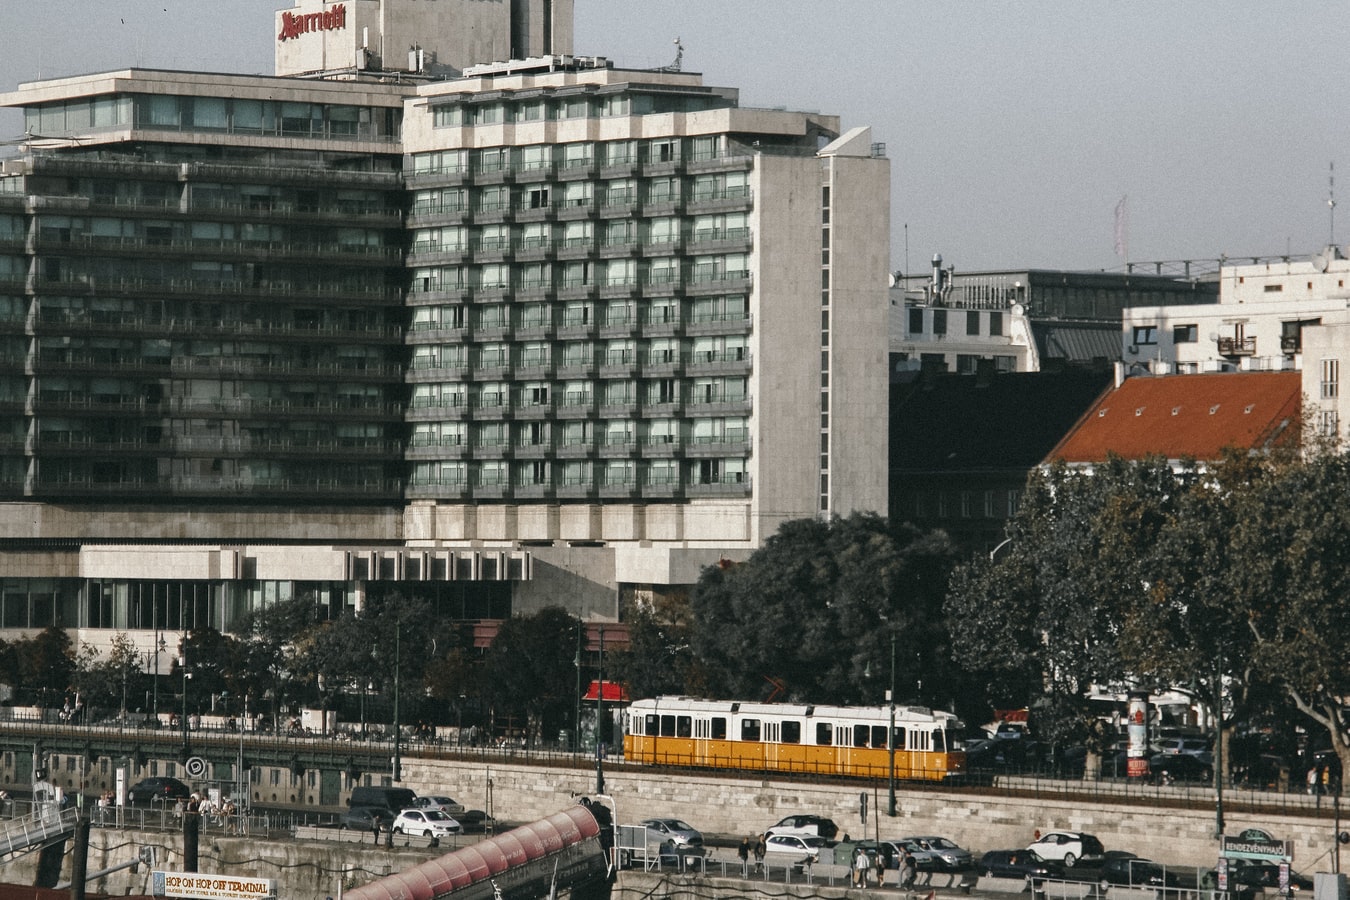 Picture of a Marriott hotel in Budapest. A tram is on tracks in front of the building.